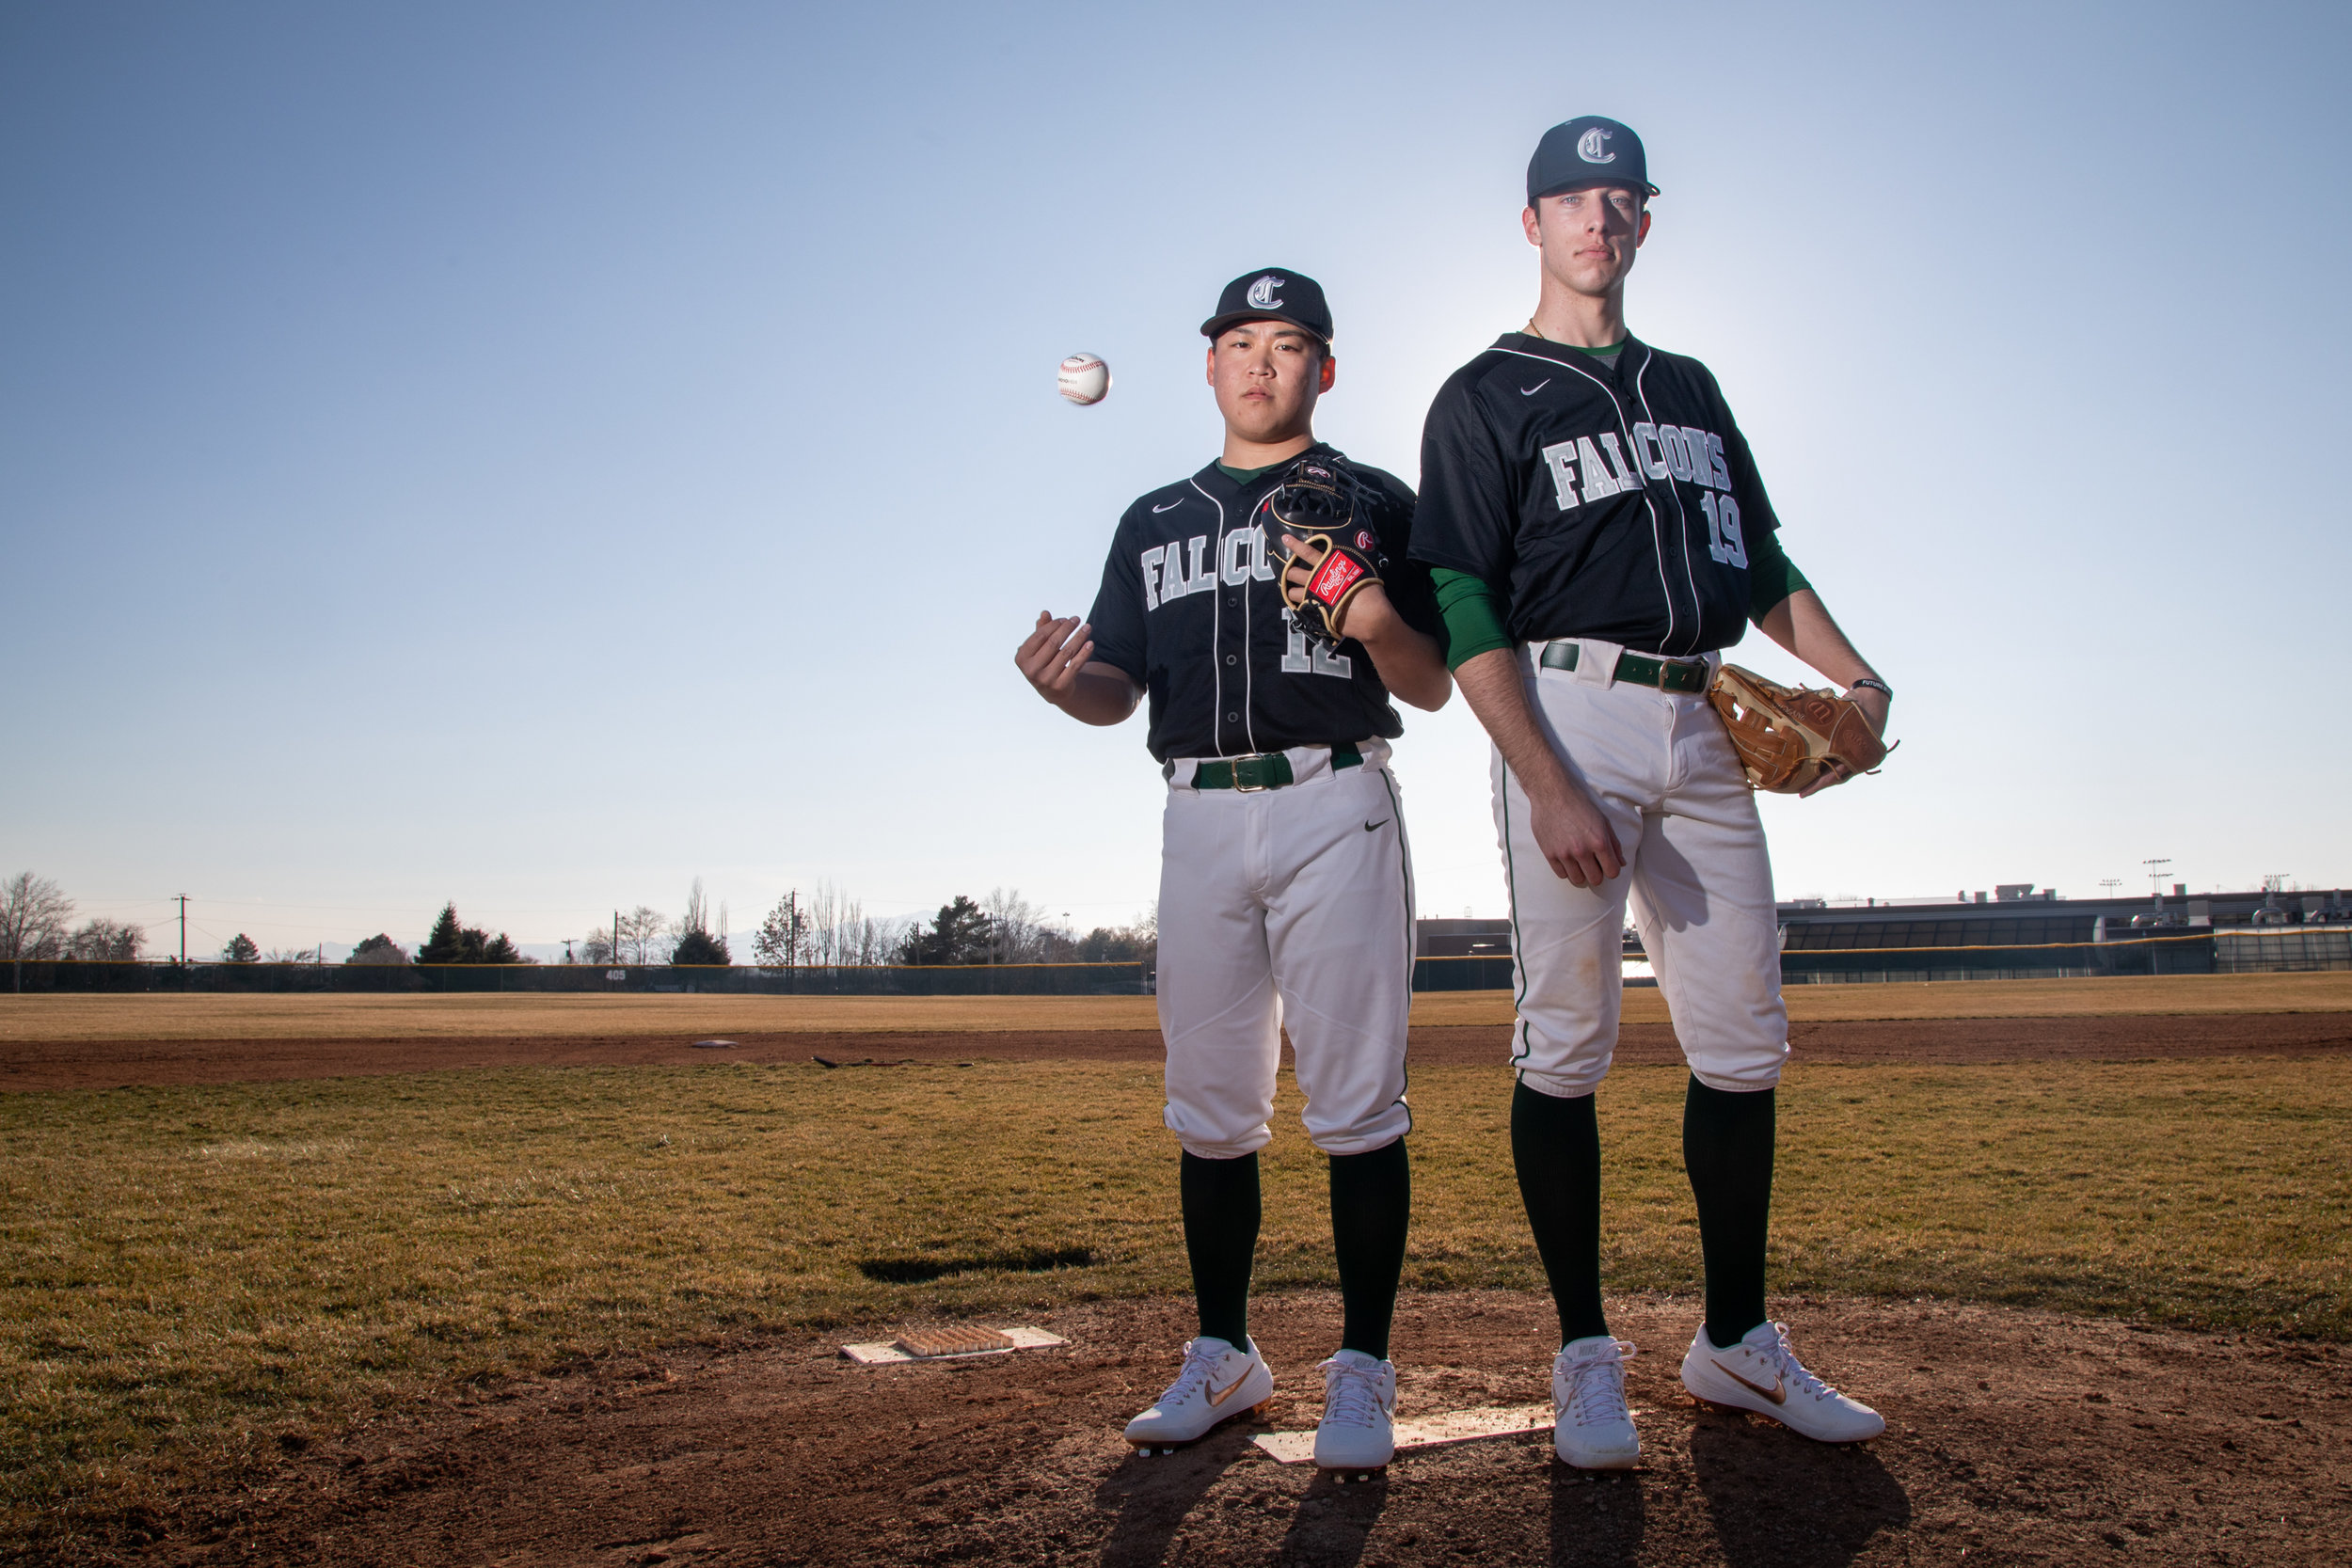  Clearfield High pitchers, Bryson Hirabayashi, left, and Conner Coleman pose on the mound at the high school on Monday, March 11, 2019. 